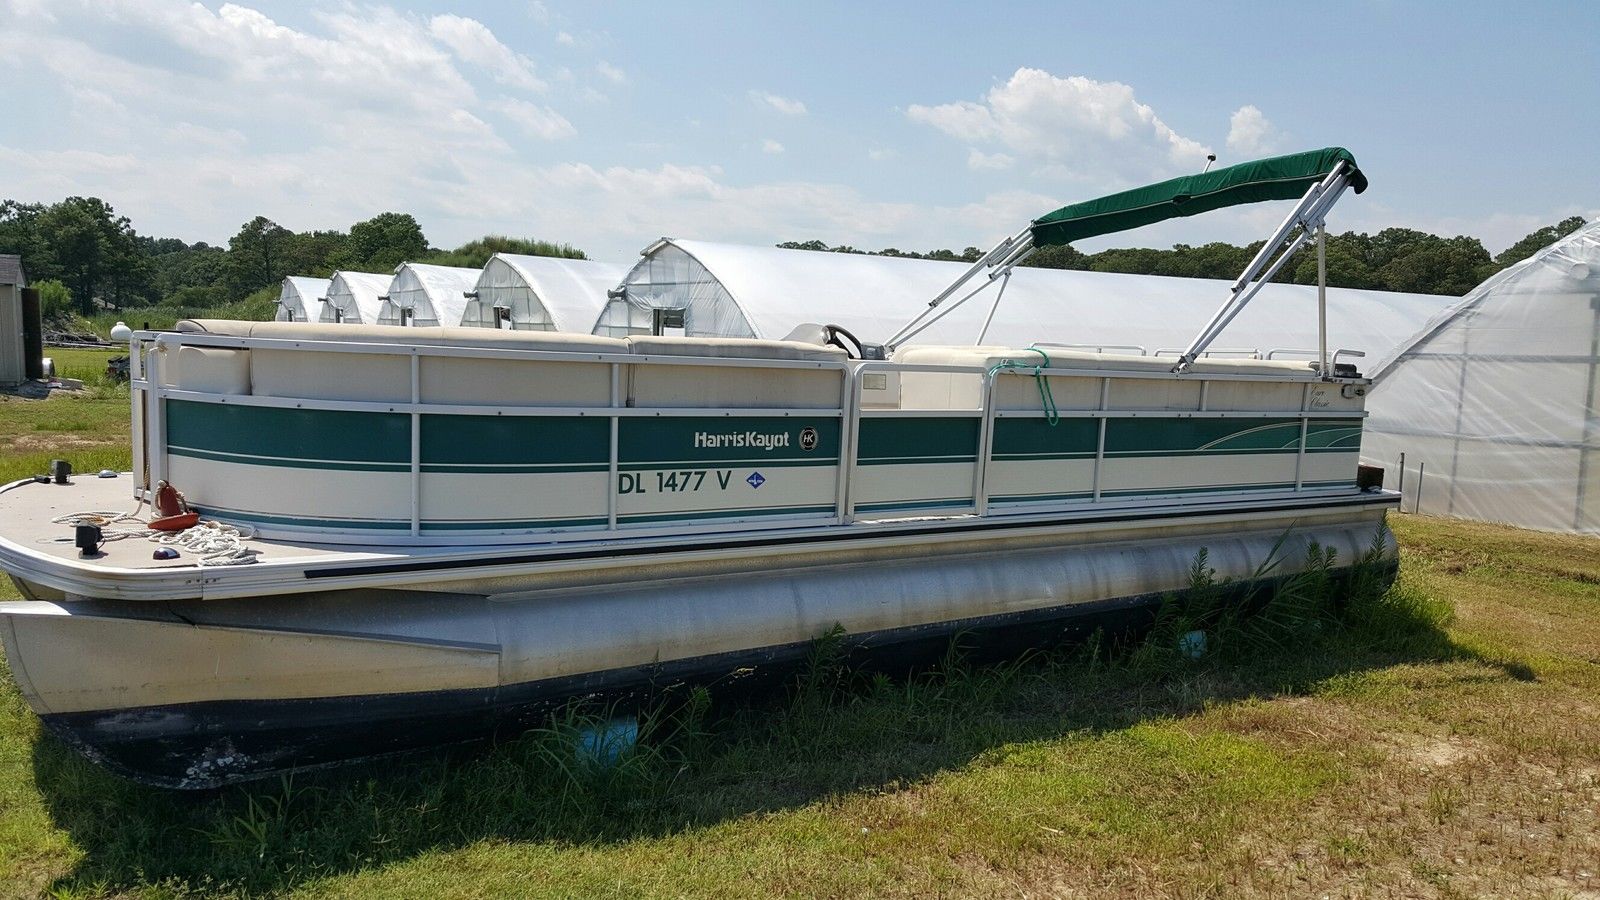 Harris Kayot 2002 for sale for $1 - Boats-from-USA.com